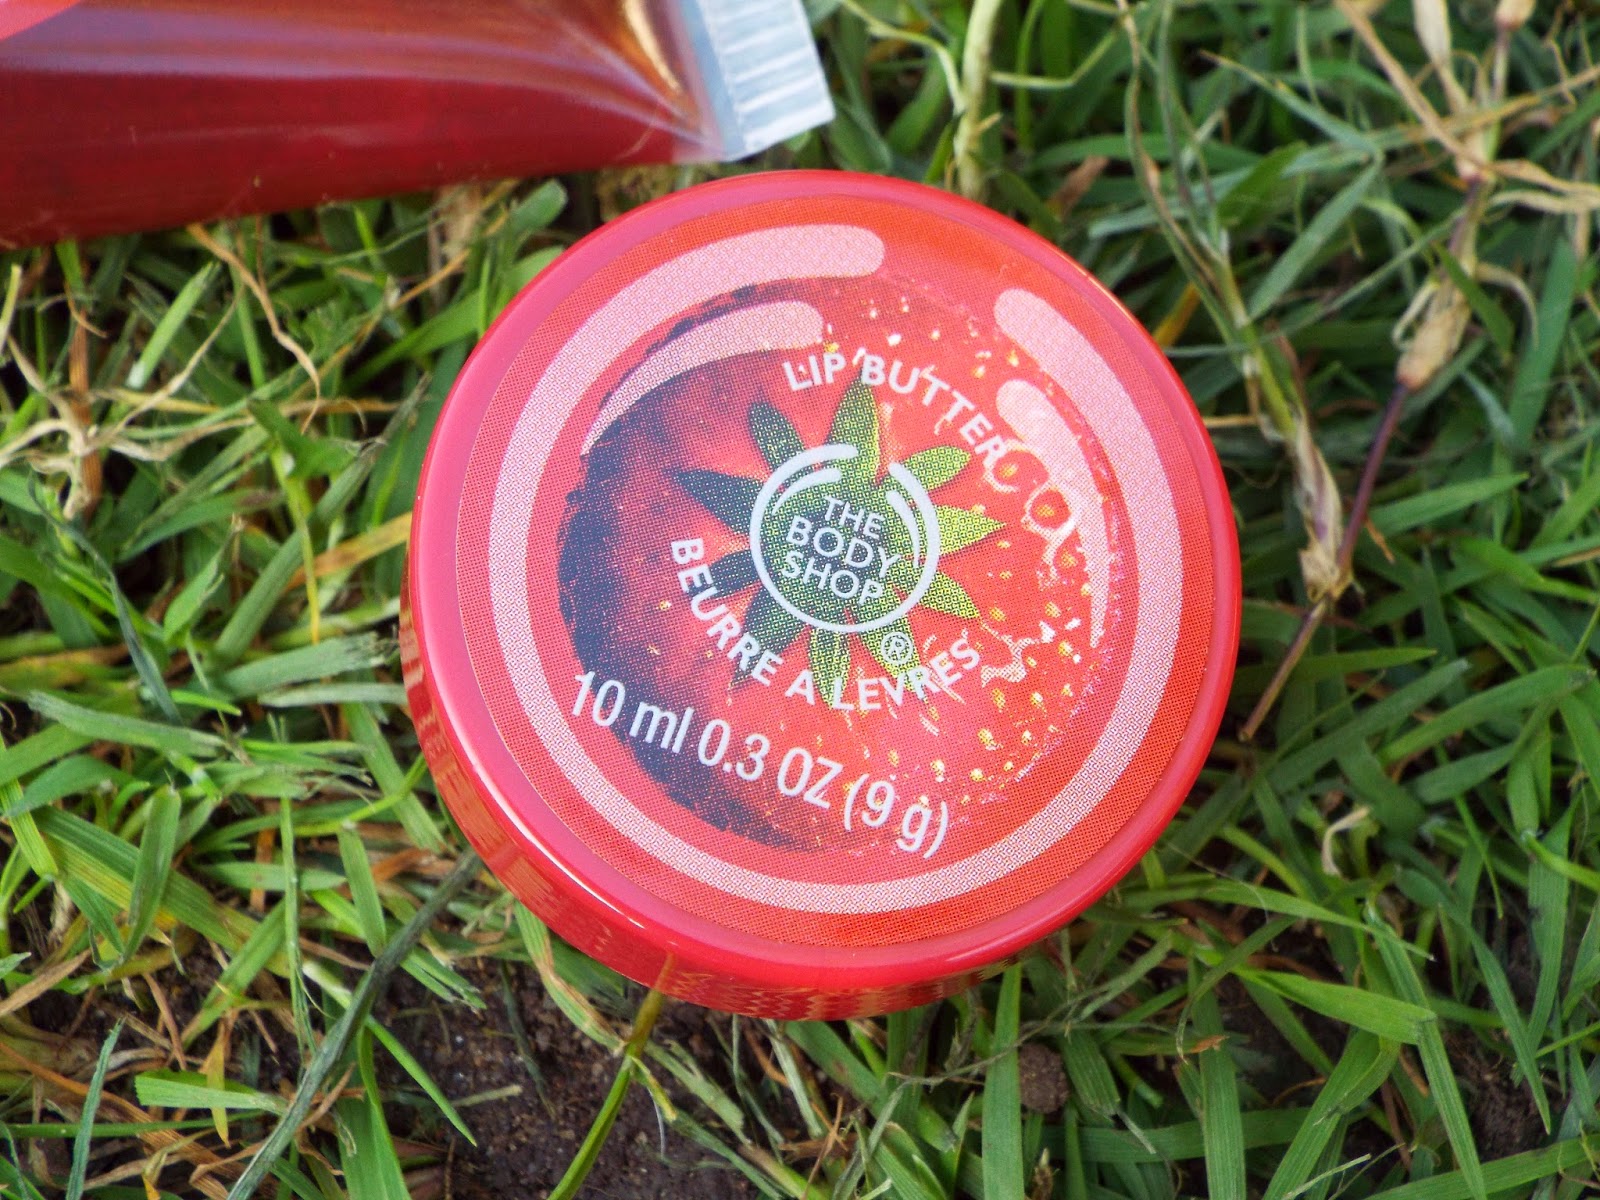 image of the body shop strawberry lip butter